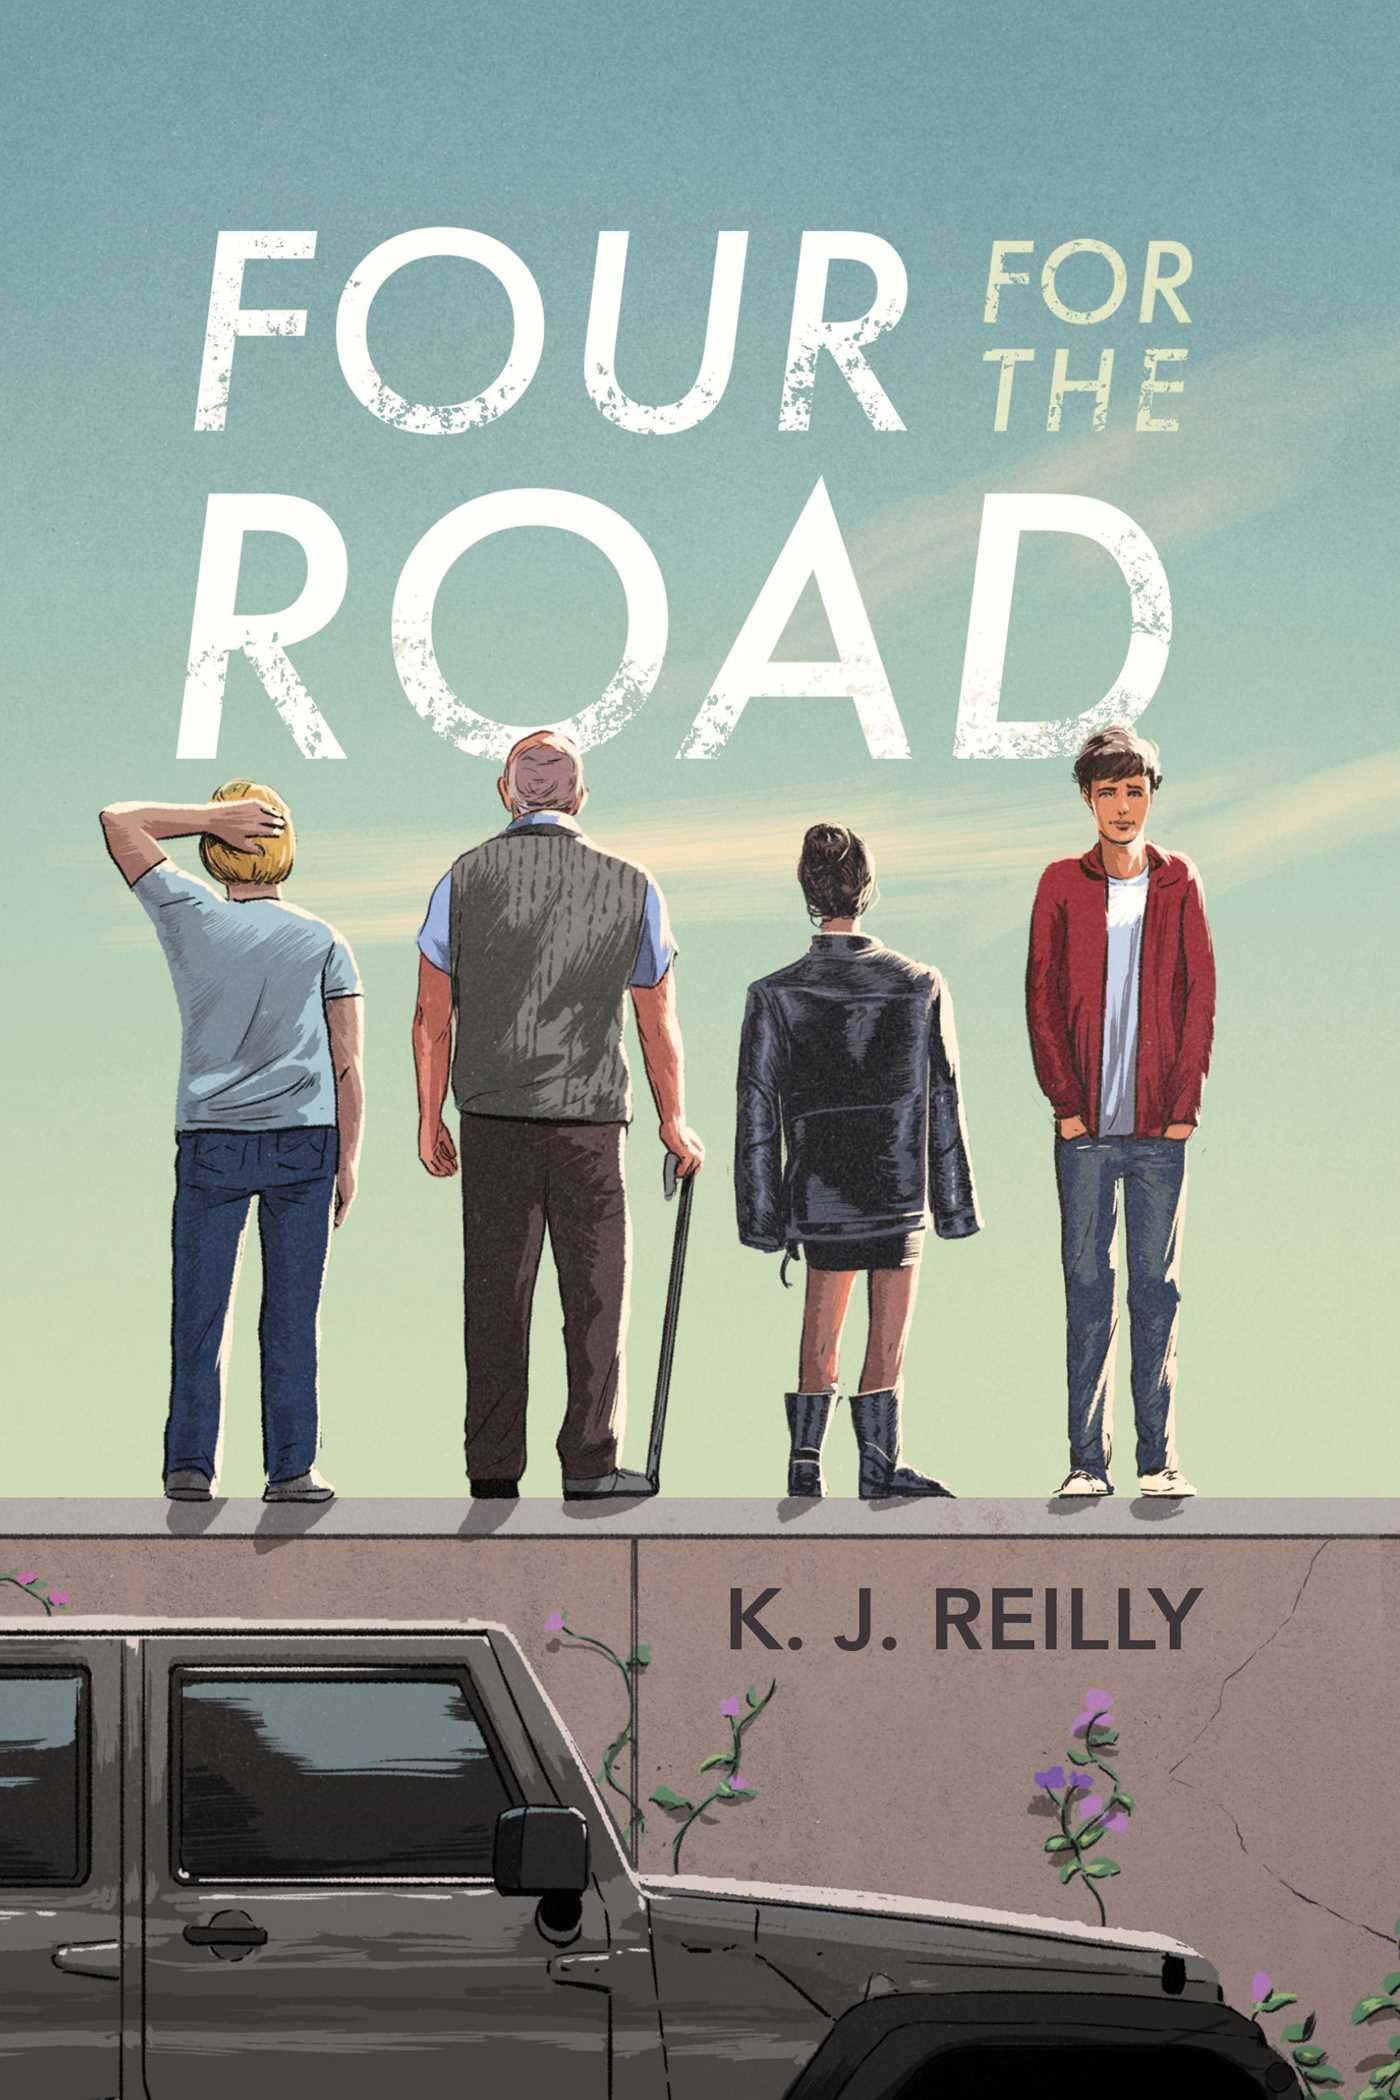 Image for "Four for the Road"